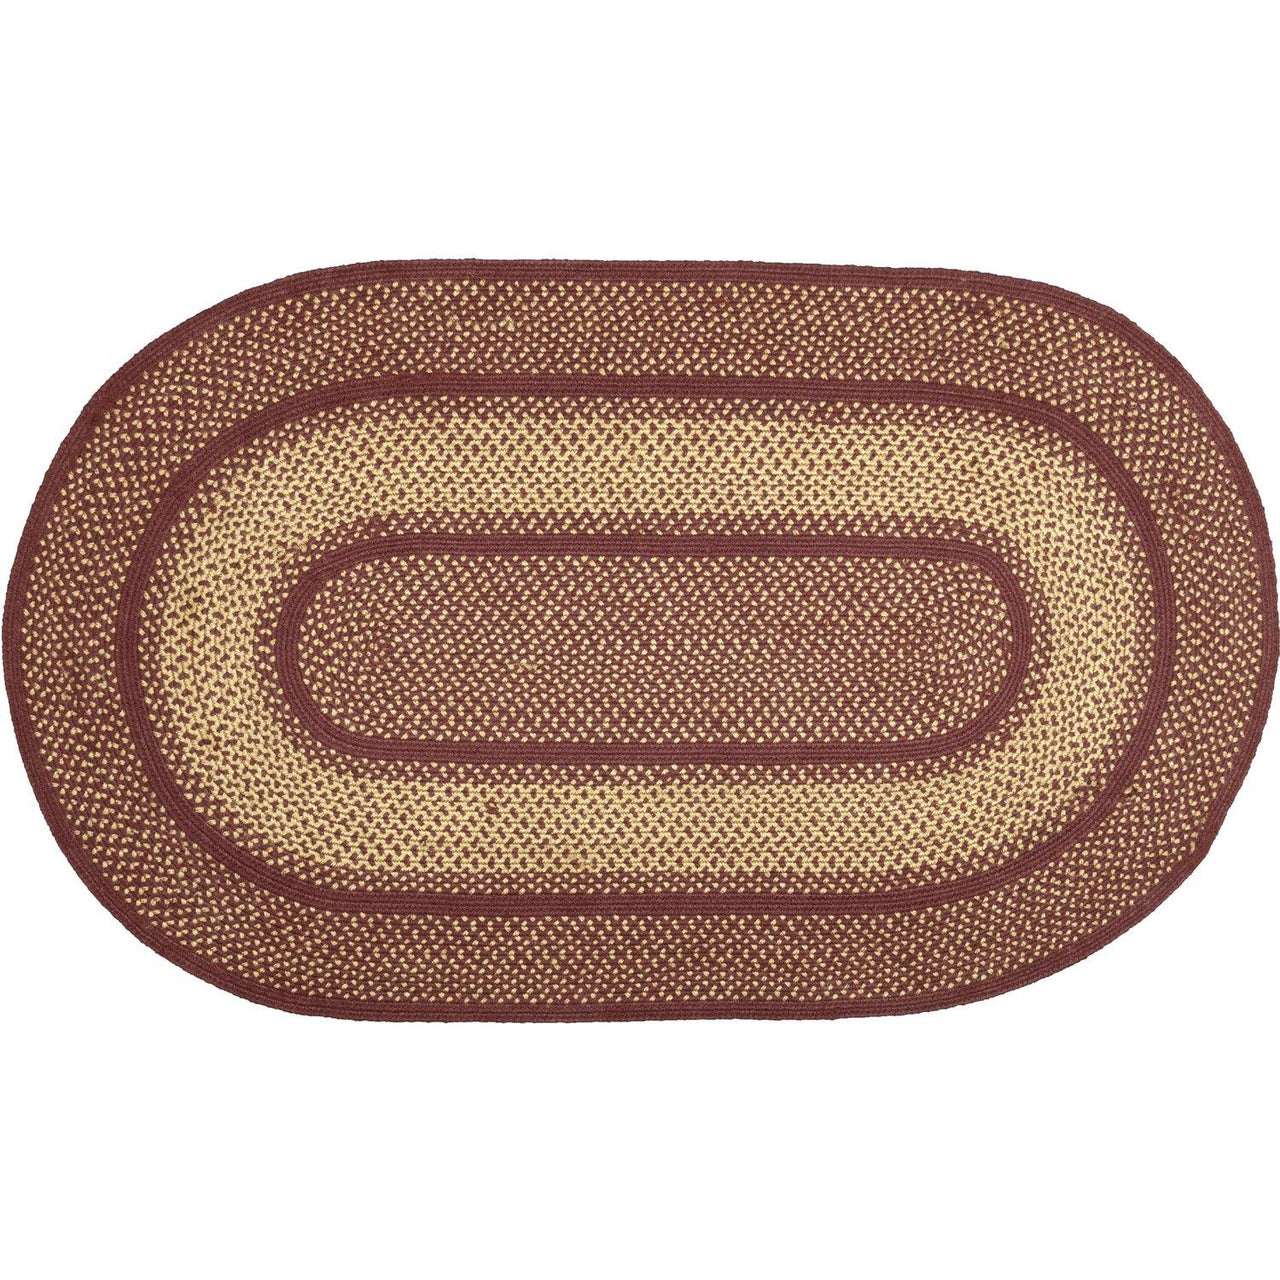 Burgundy Red Primitive Jute Braided Rug Oval 3'x5' with Rug Pad VHC Brands - The Fox Decor